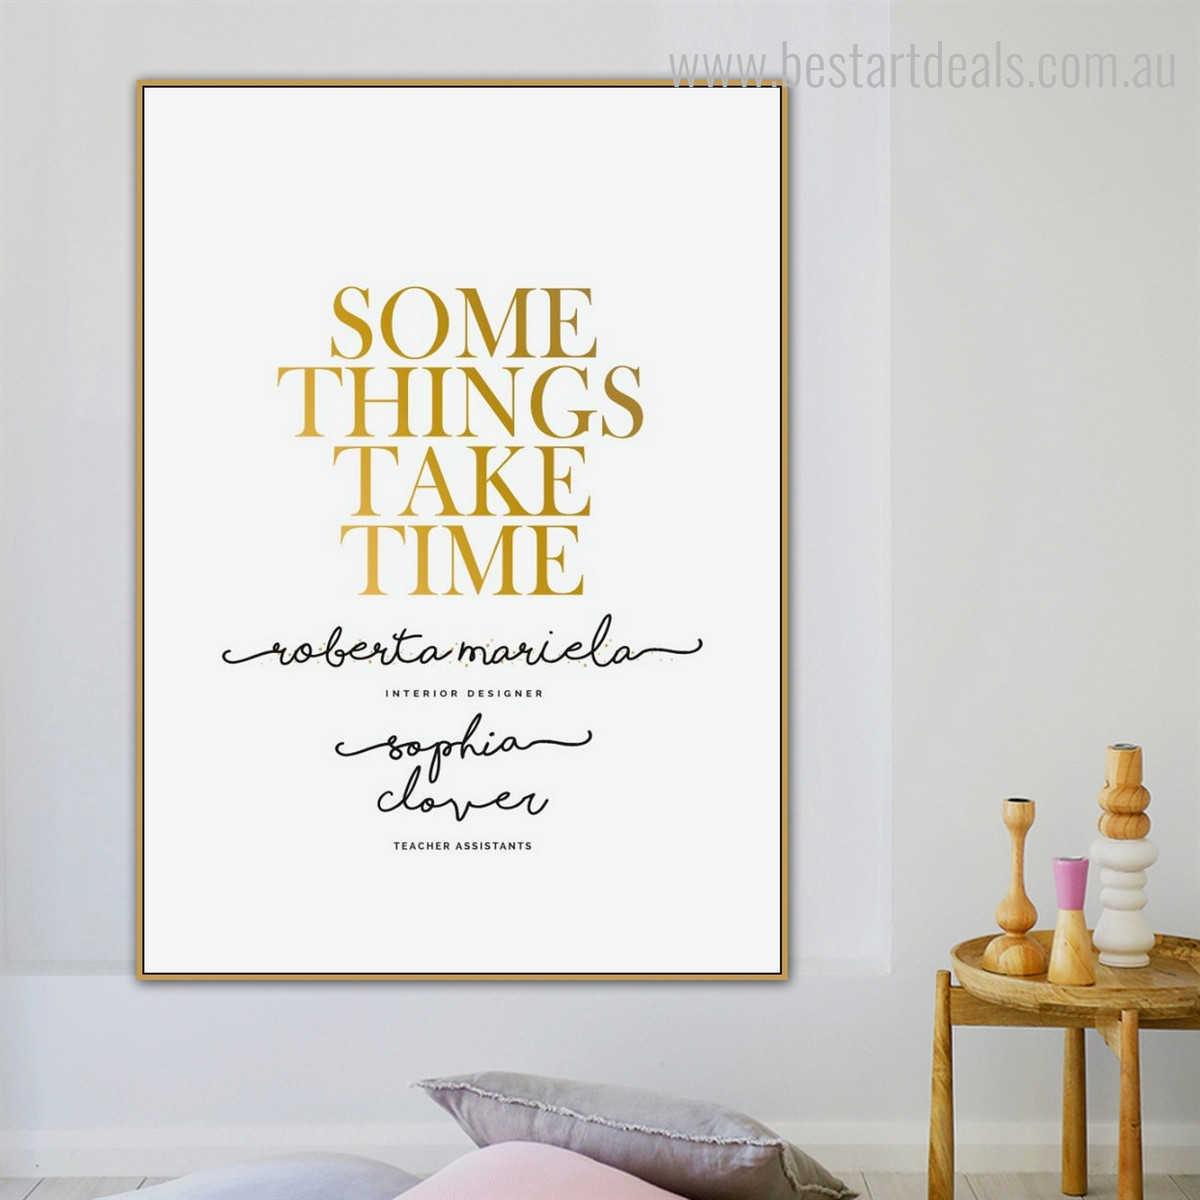 Something’s Calligraphy Modern Nordic Framed Scheme Picture Canvas Print for Room Wall Decor